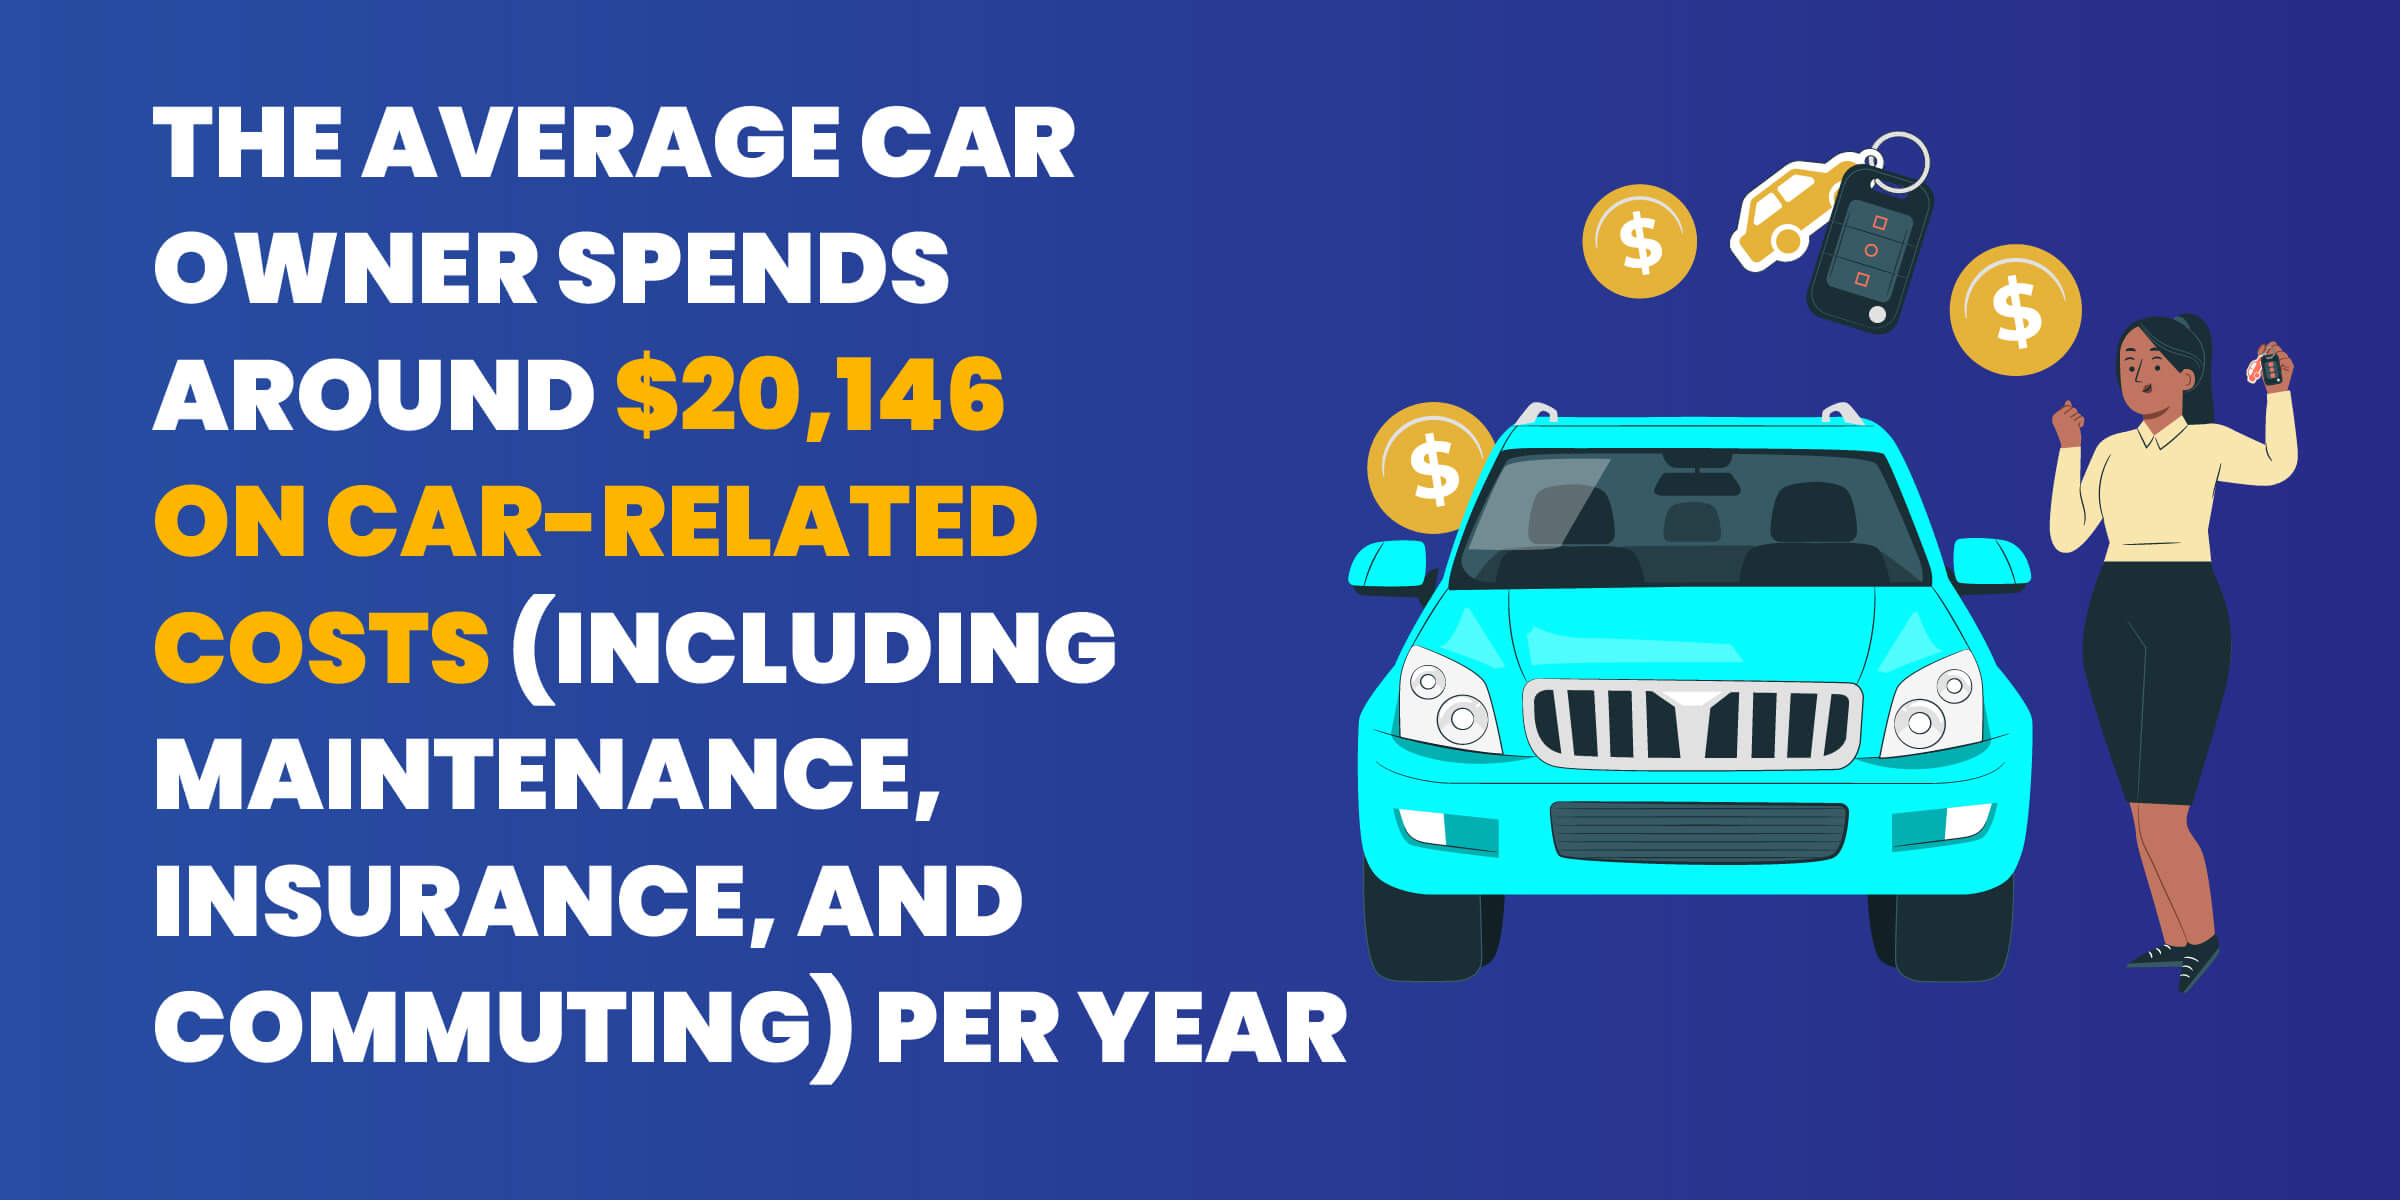 Car Ownership Stats - Average Spend